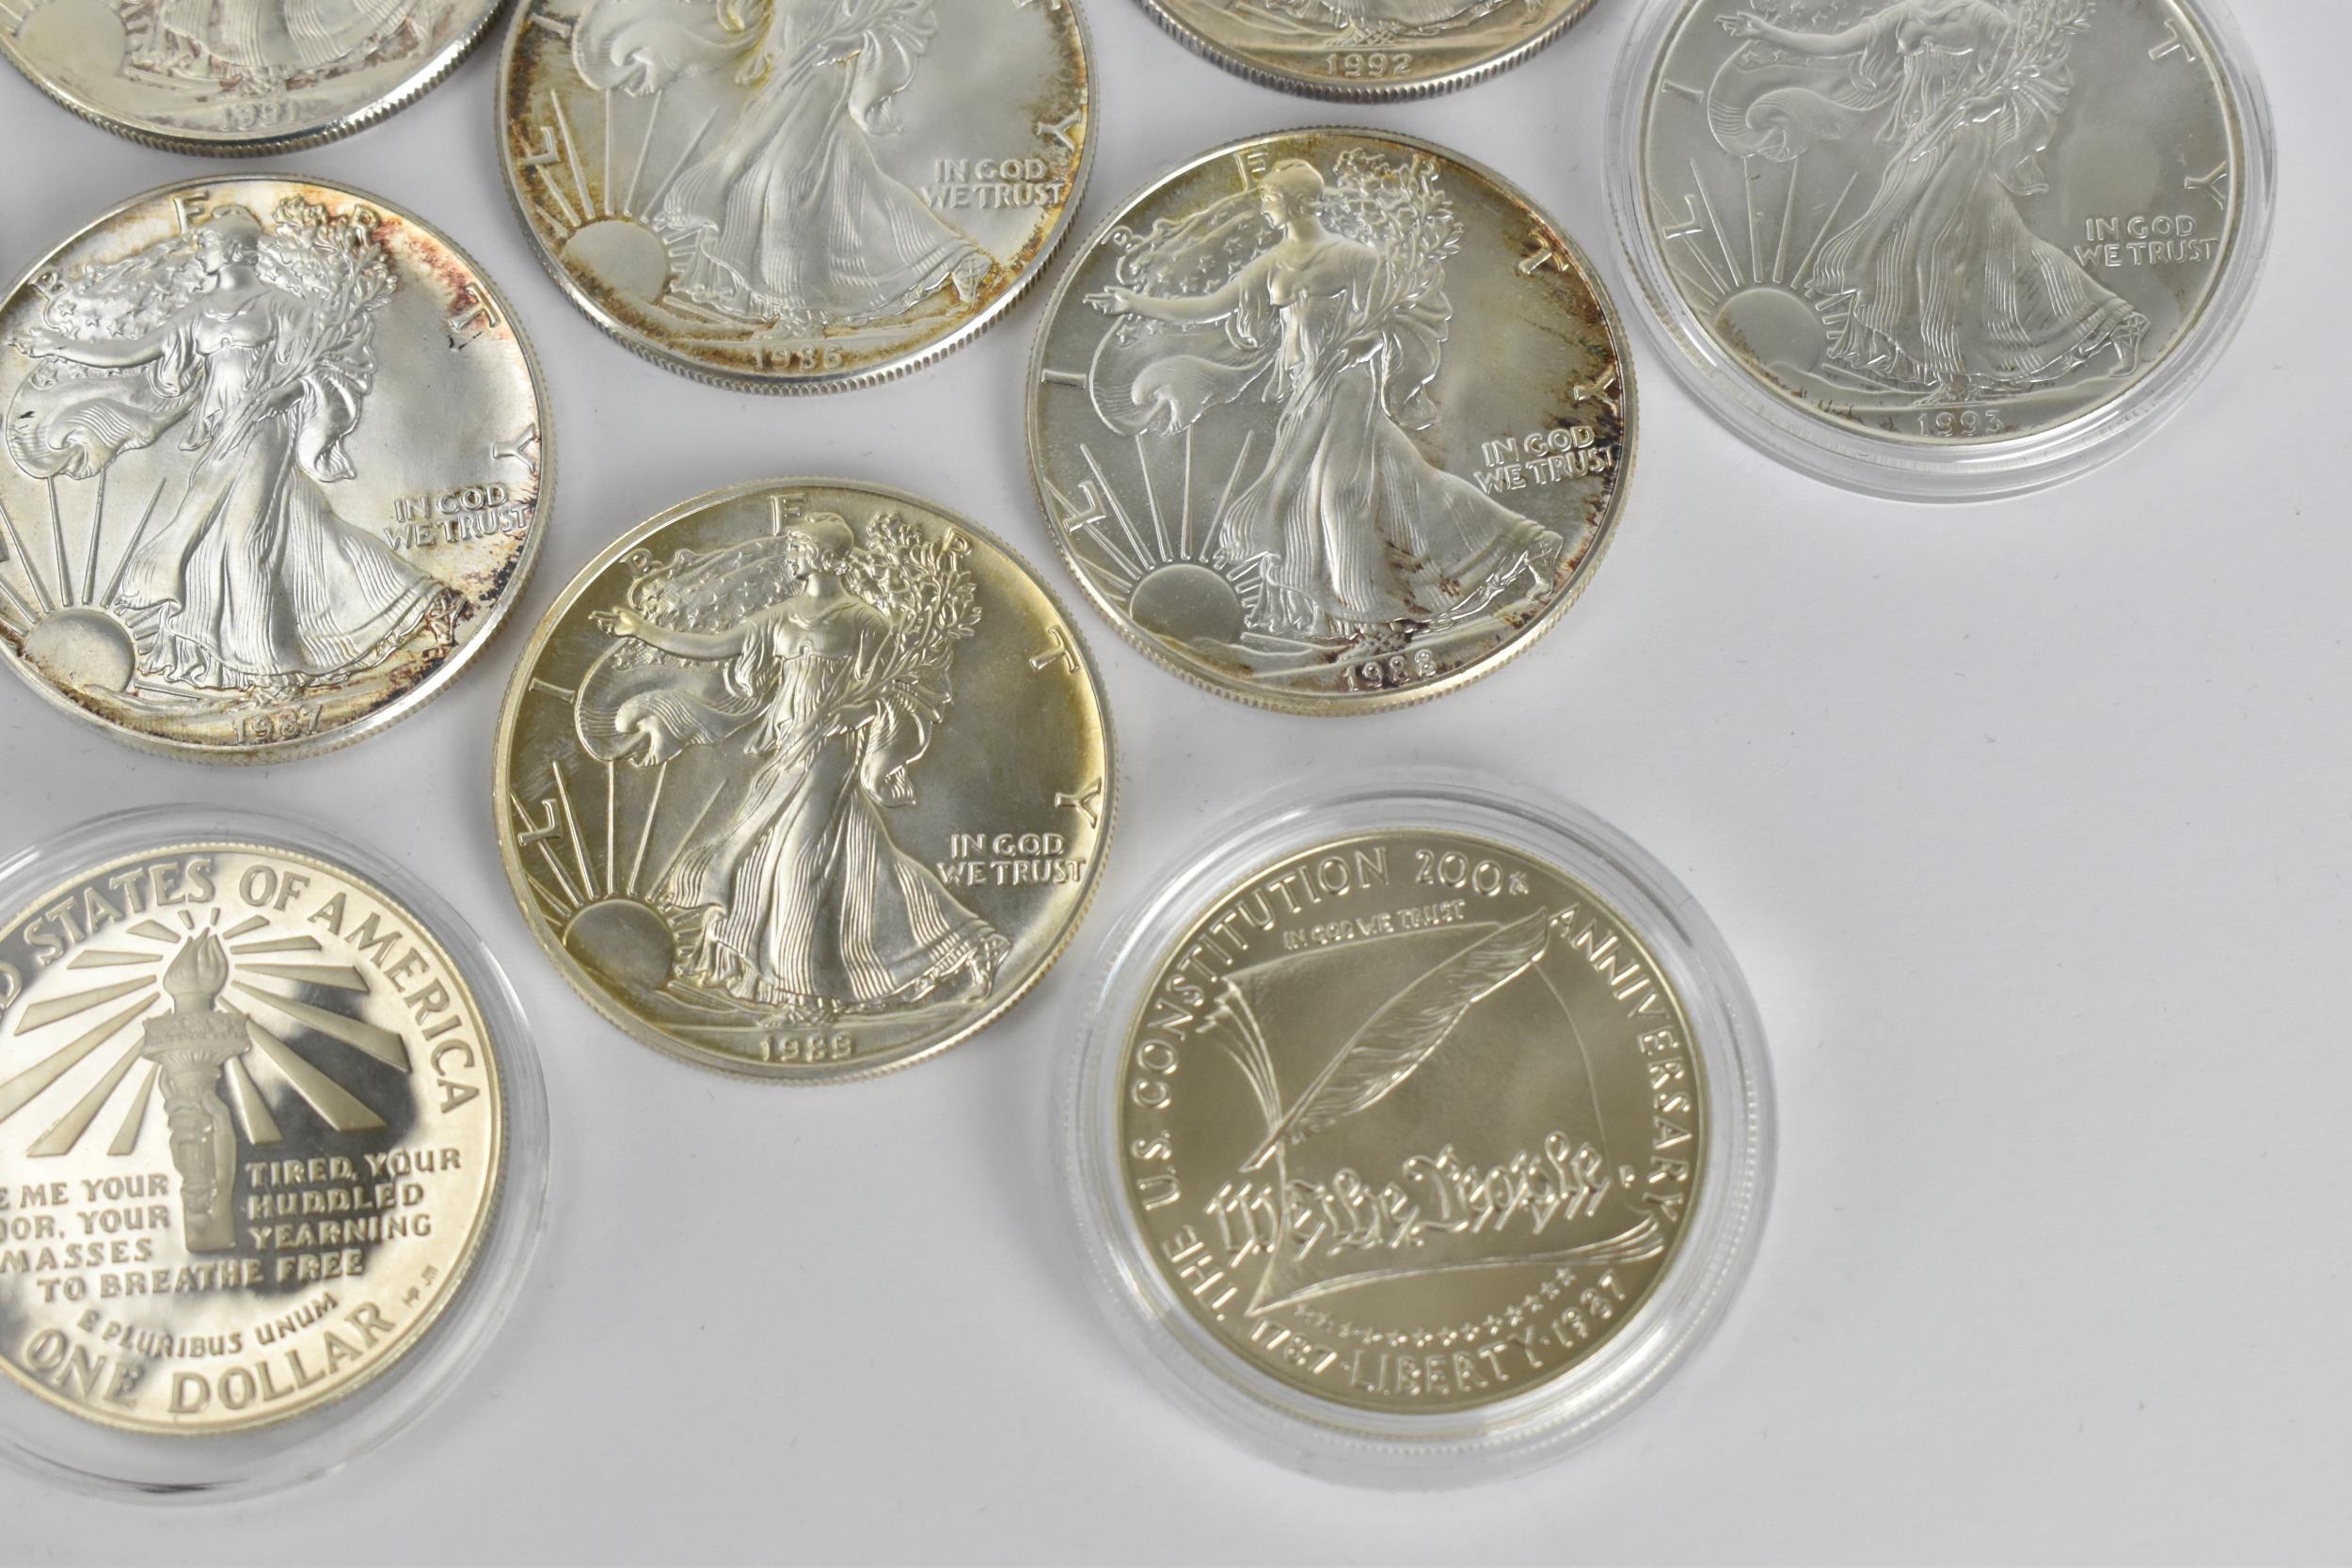 Official Silver Coins of The United States of America' part of the Royal Mint collection, eight ' - Image 8 of 10